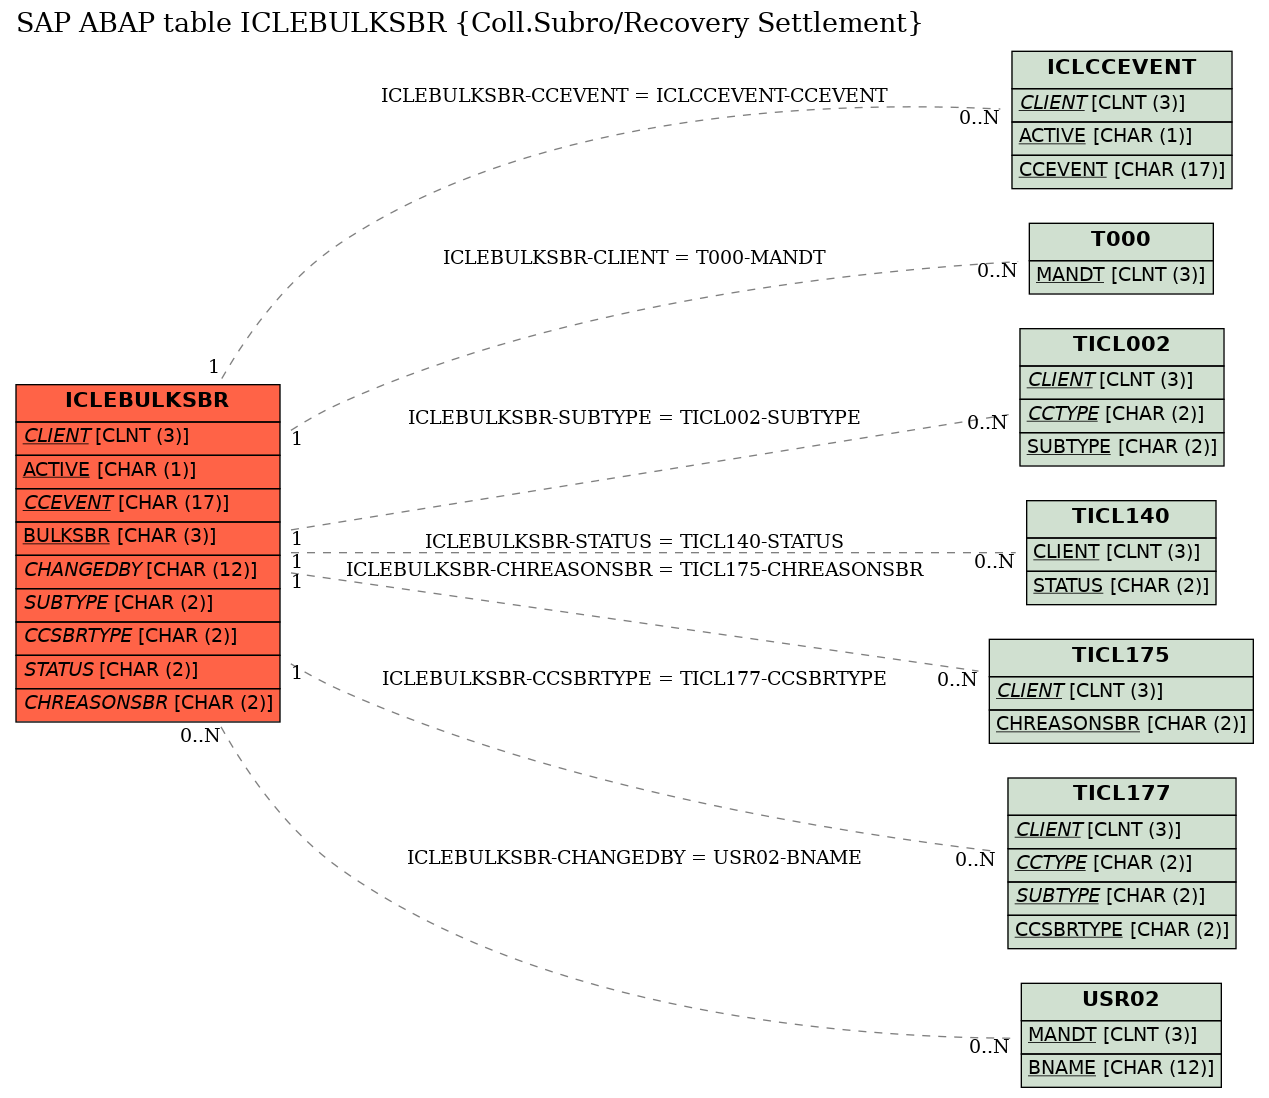 E-R Diagram for table ICLEBULKSBR (Coll.Subro/Recovery Settlement)